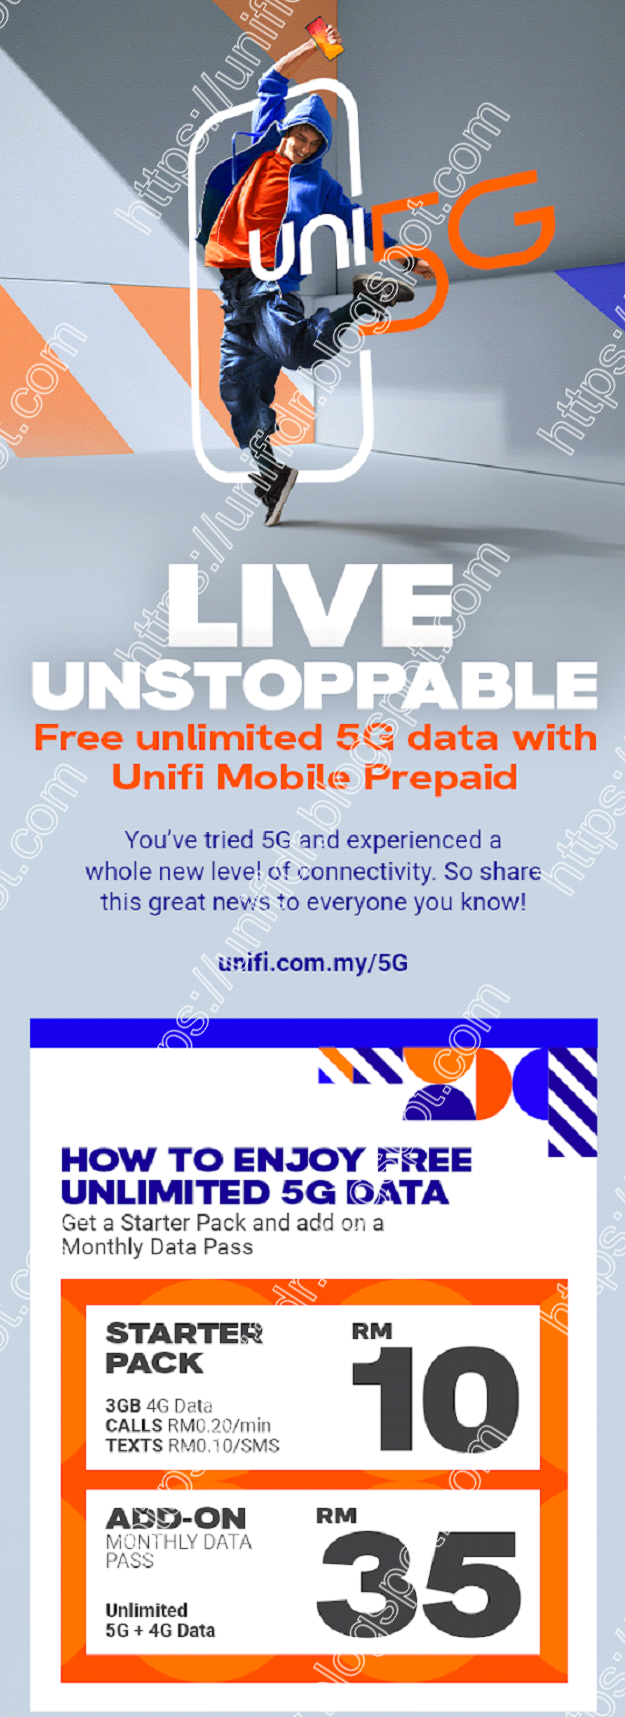 Get FREE unlimited 5G data with Unifi Mobile Prepaid